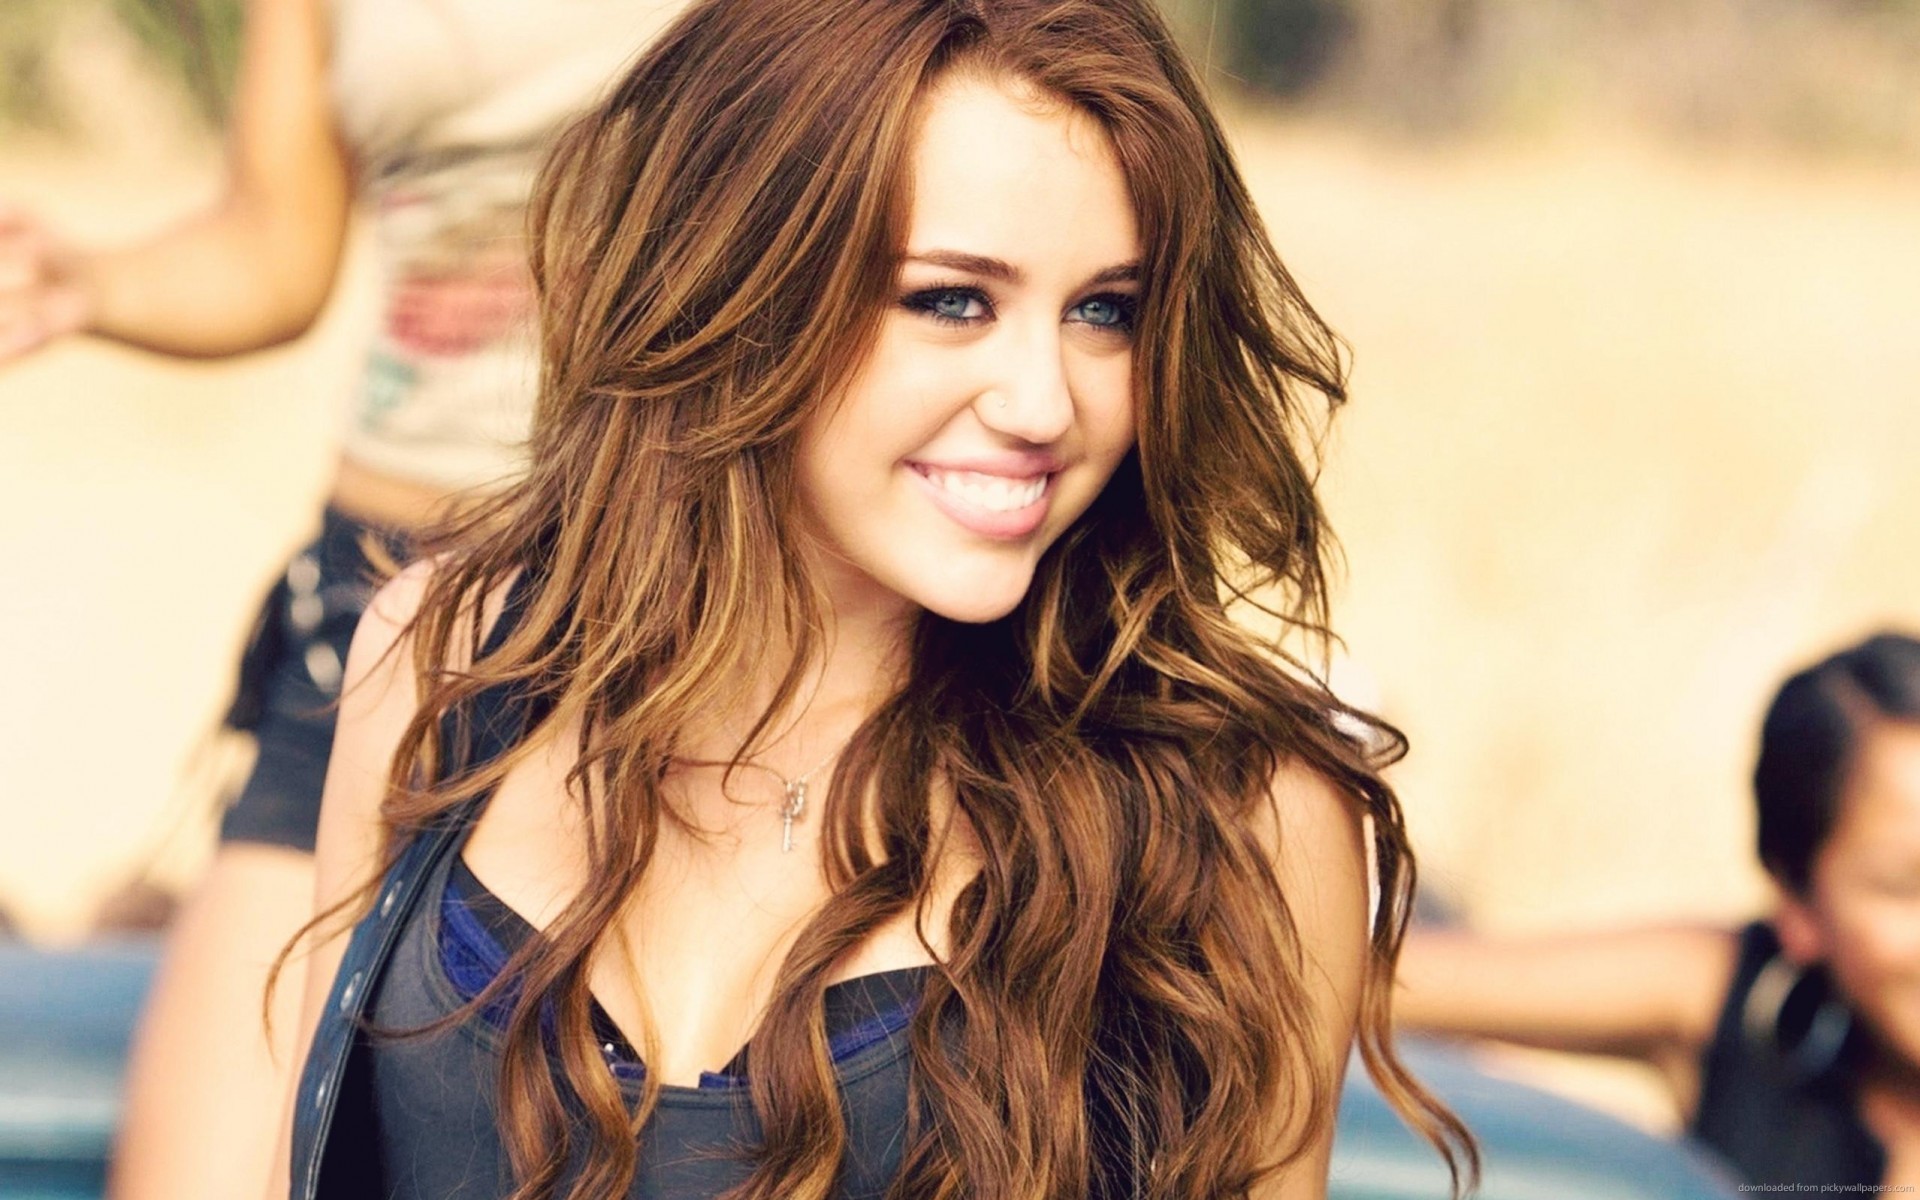 Miley Cyrus Wallpapers hd